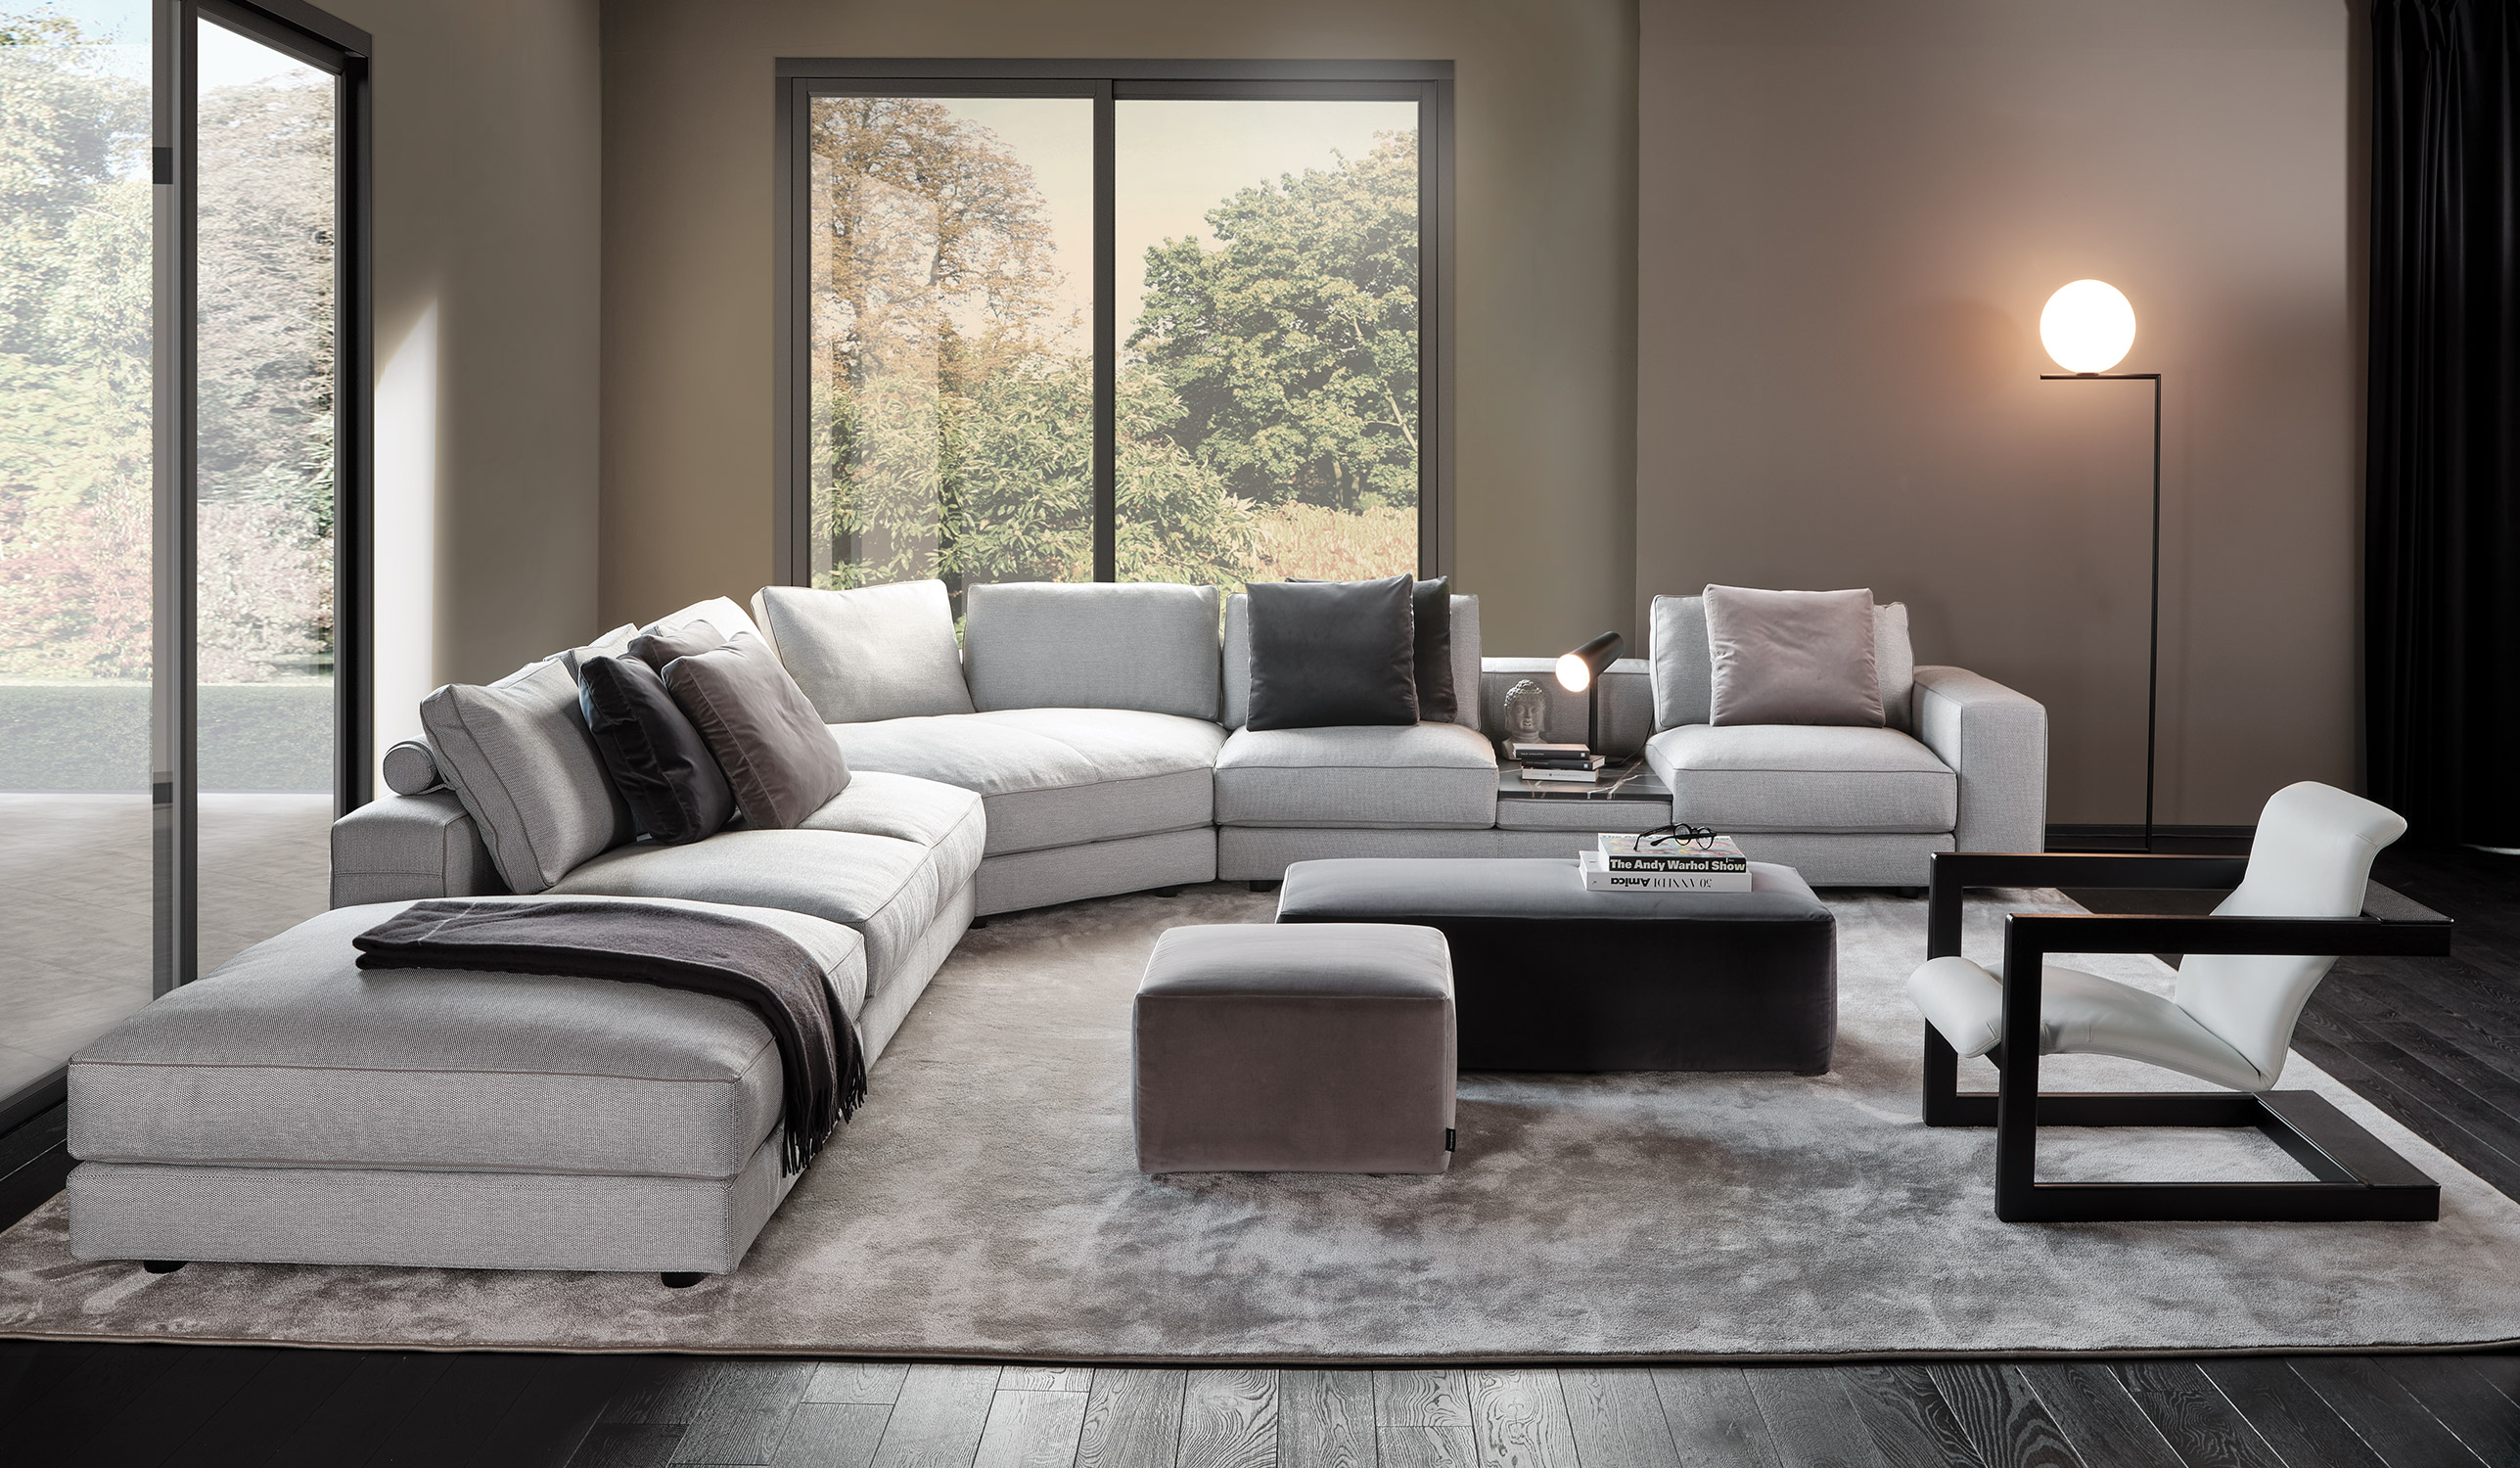 Mussi Sinfonia sectional sofa composition